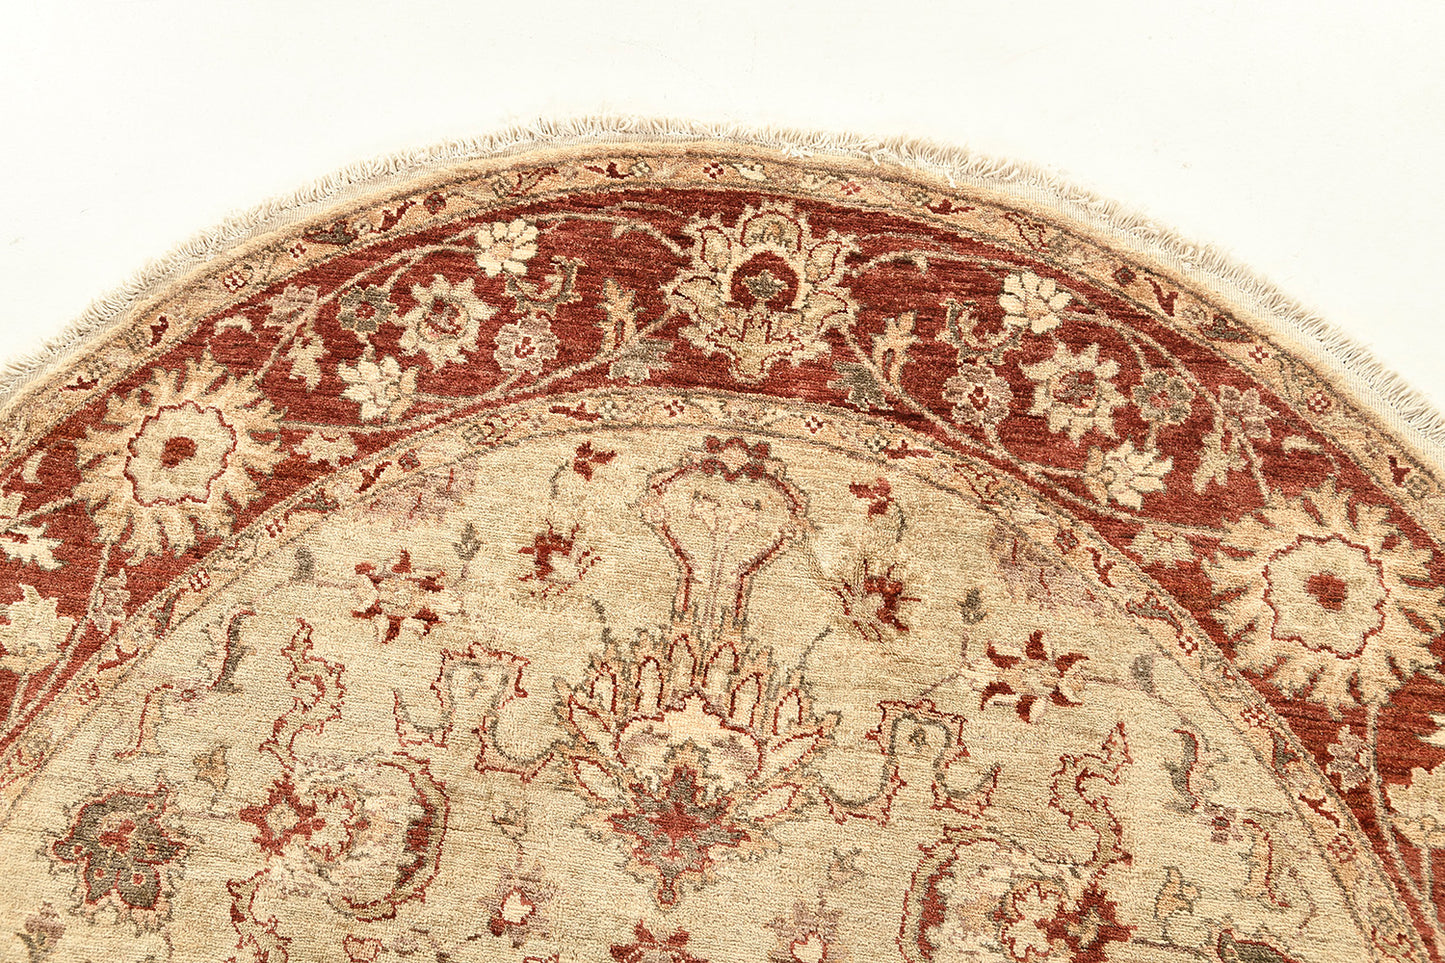 Natural Dye Sultanabad Revival Round Rug